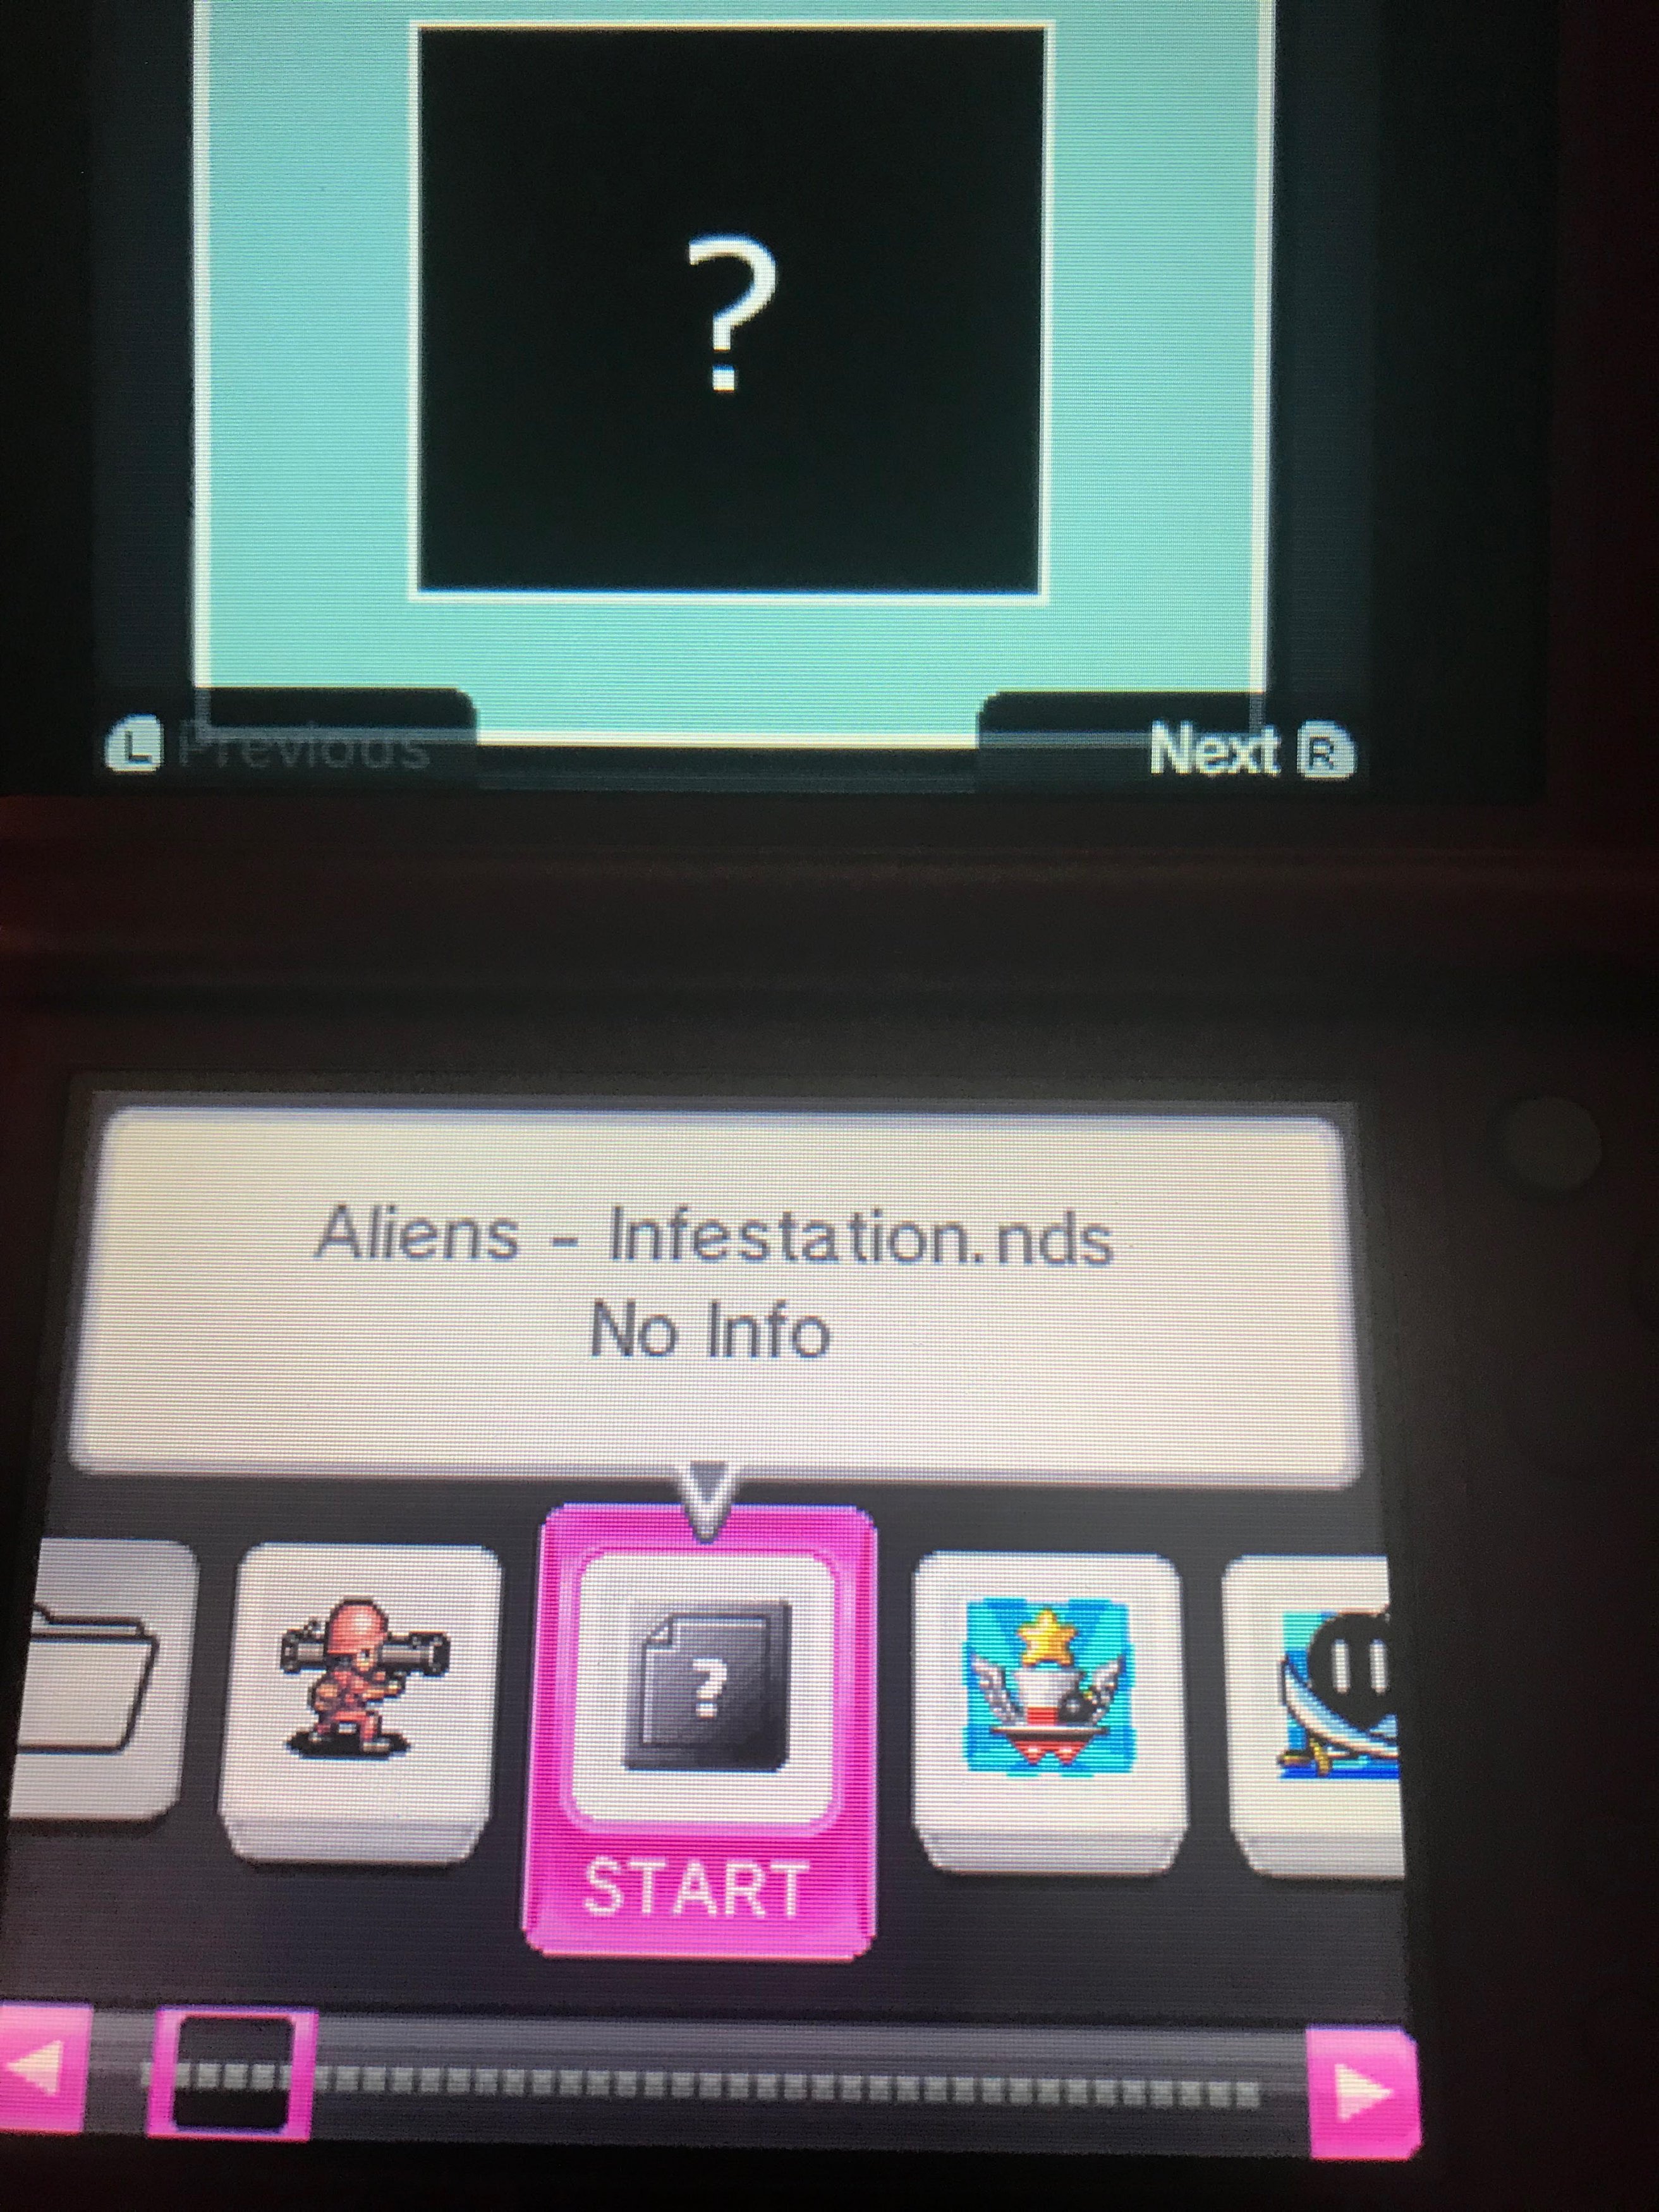 Twilight Menu ++ on 3DS some DS games show up as "No info" | GBAtemp.net -  The Independent Video Game Community